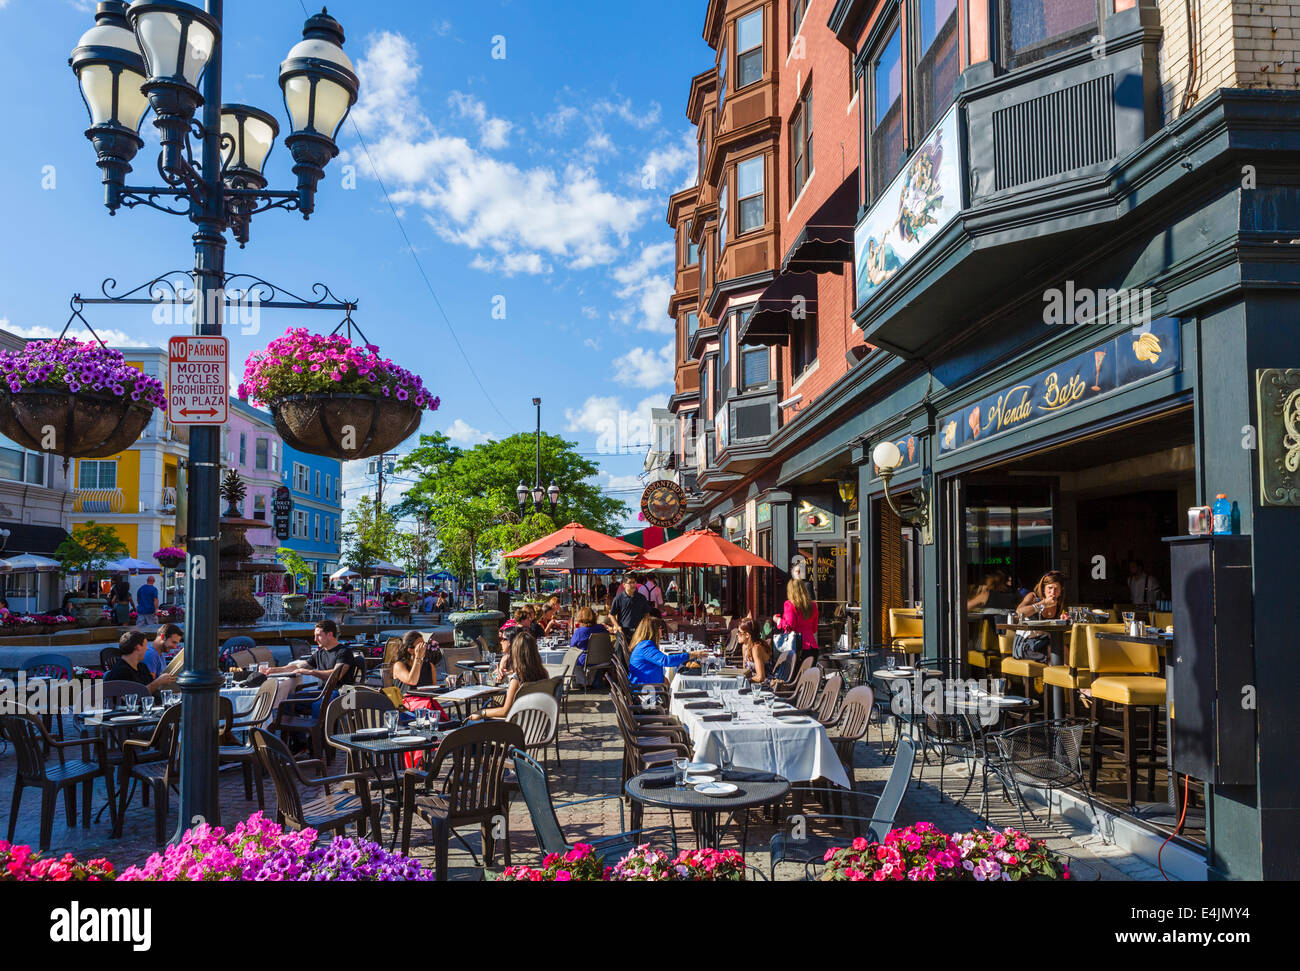 Restaurants auf DePasquale Square off Atwells Avenue, Federal Hill District, Providence, Rhode Island, USA Stockfoto